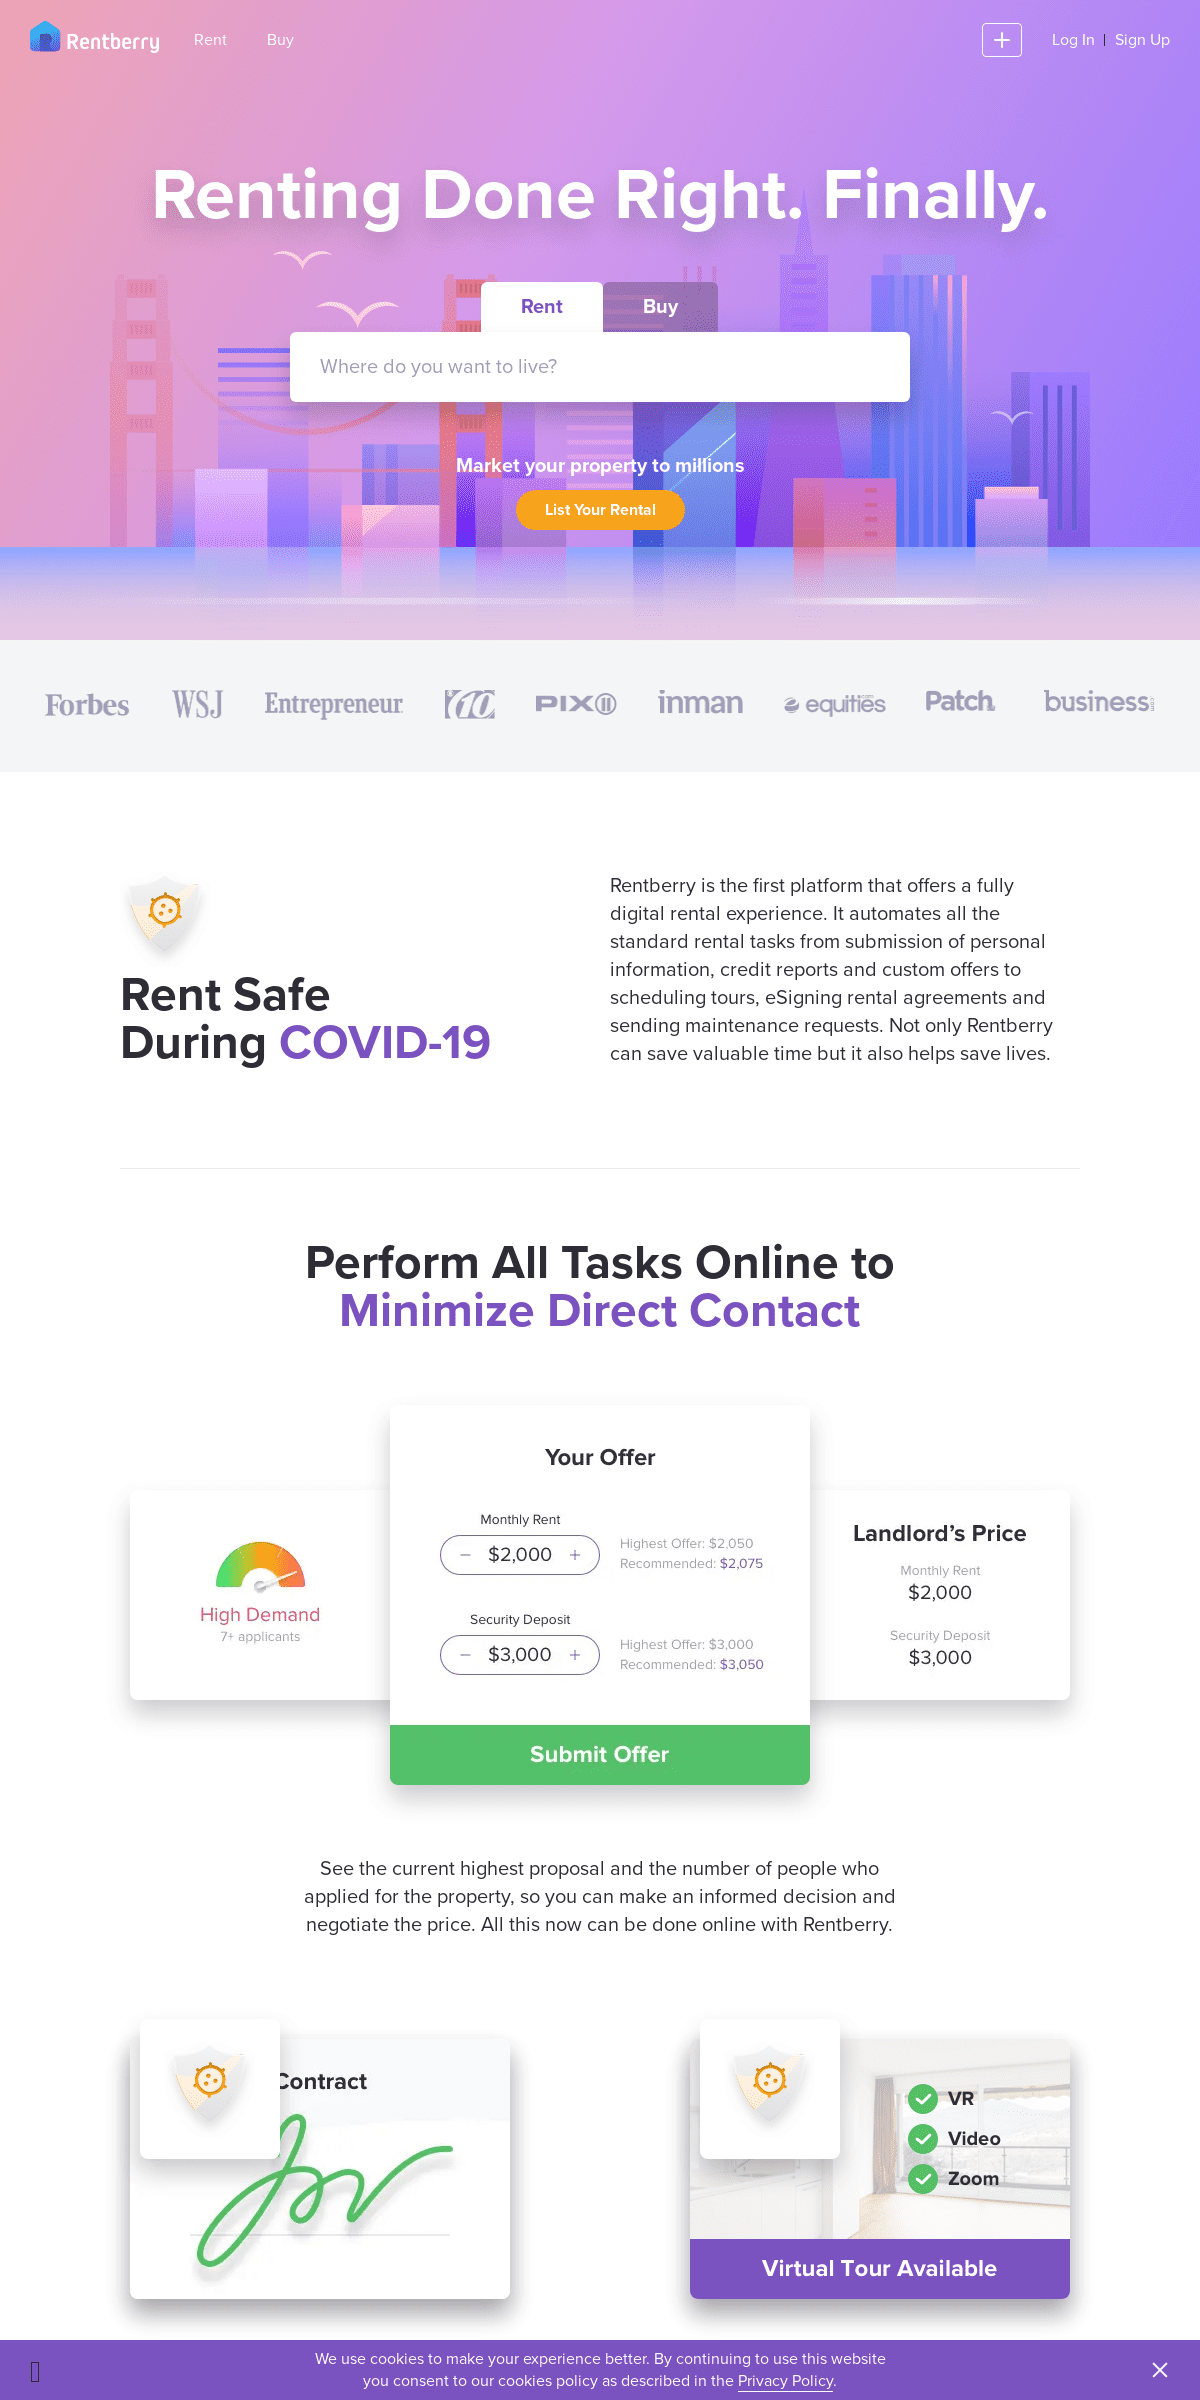 A complete backup of rentberry.com